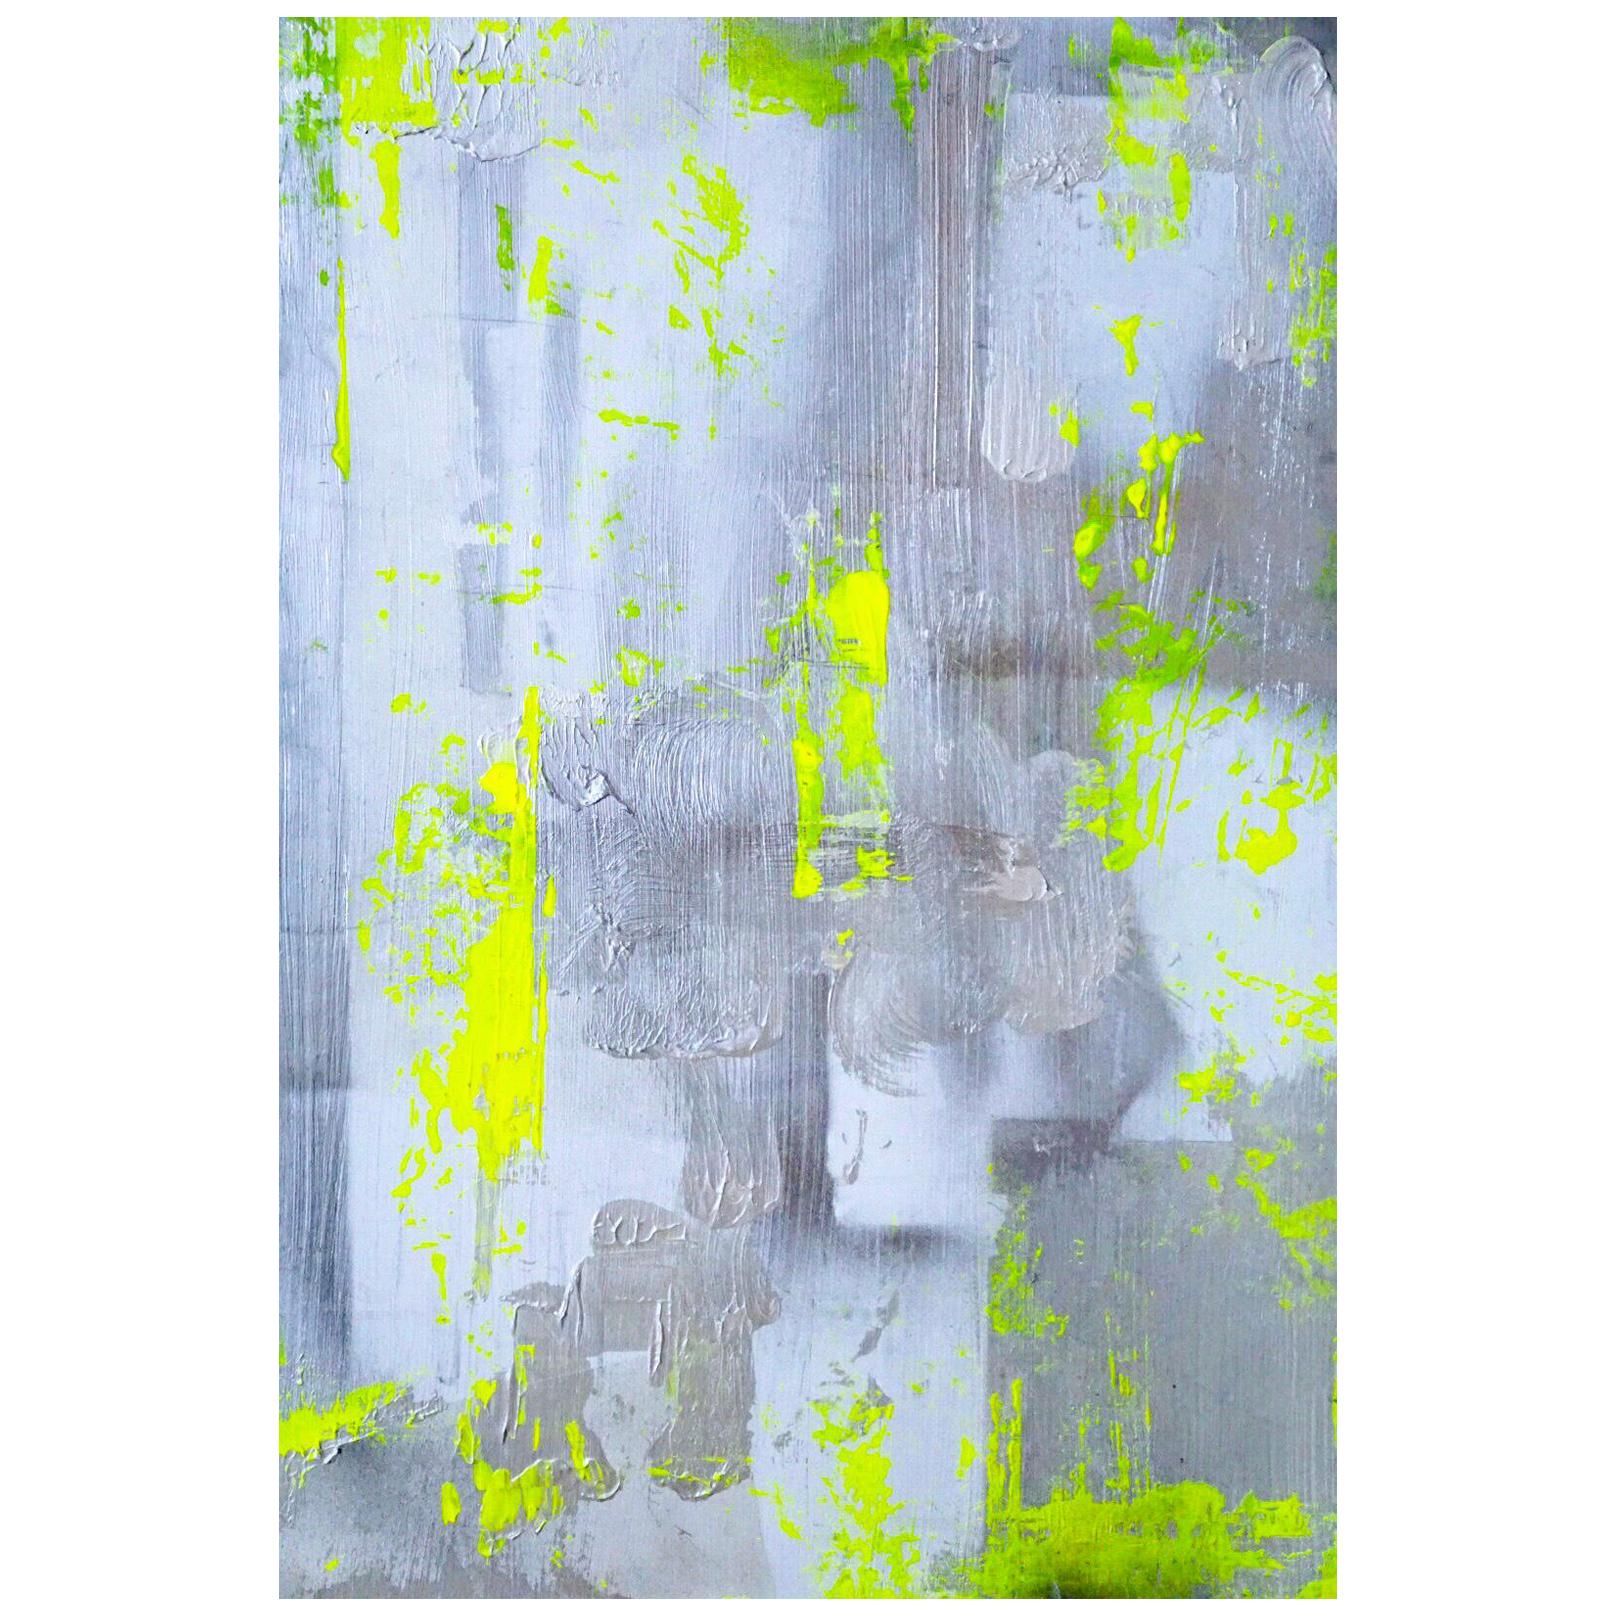 “Chartreuse Verseau” is an original, one of a kind acrylic, silver leaf and pearl dust painting on wood by American Artist, Chanel Verdult. Sure to create dramatic ambiance in any room, “Chartreuse Verseau” features bold shades of chartreuse green